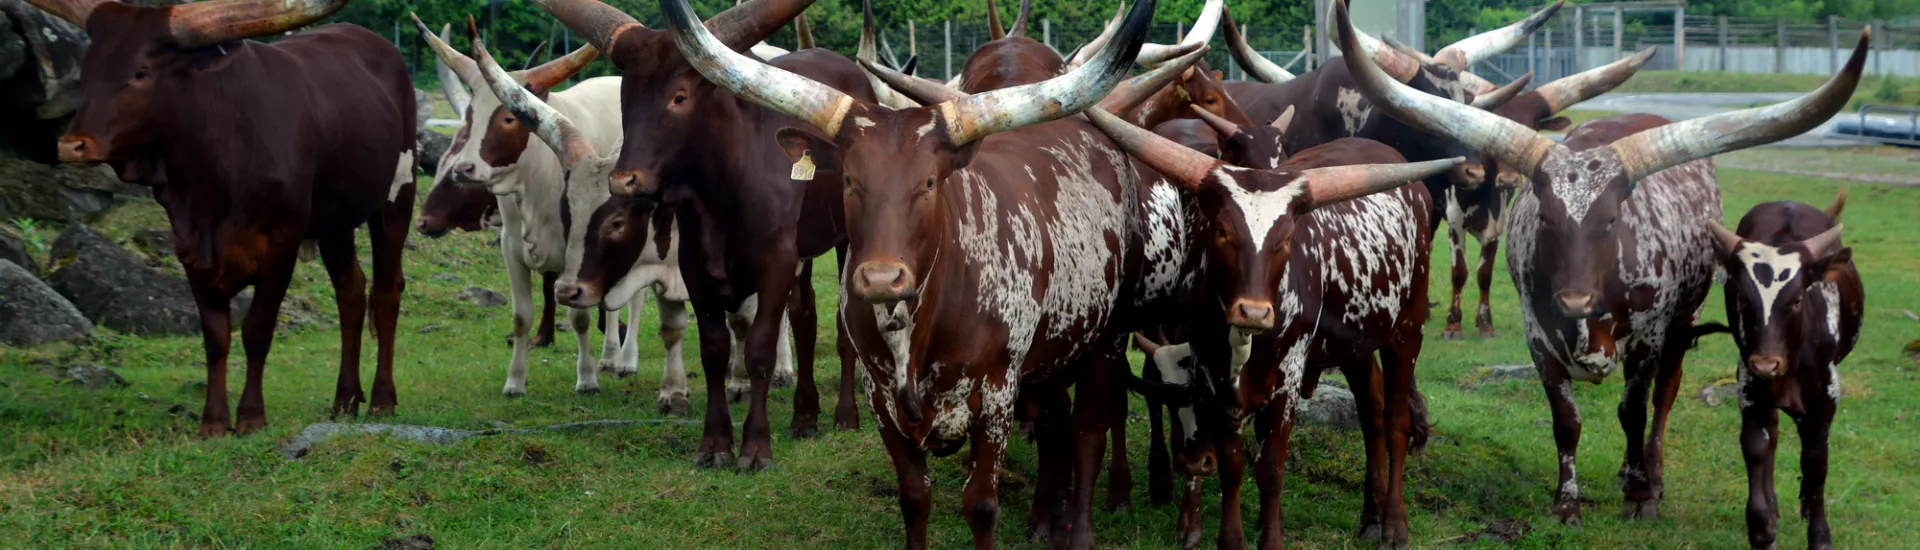 Sanga cattle breeds of central Africa